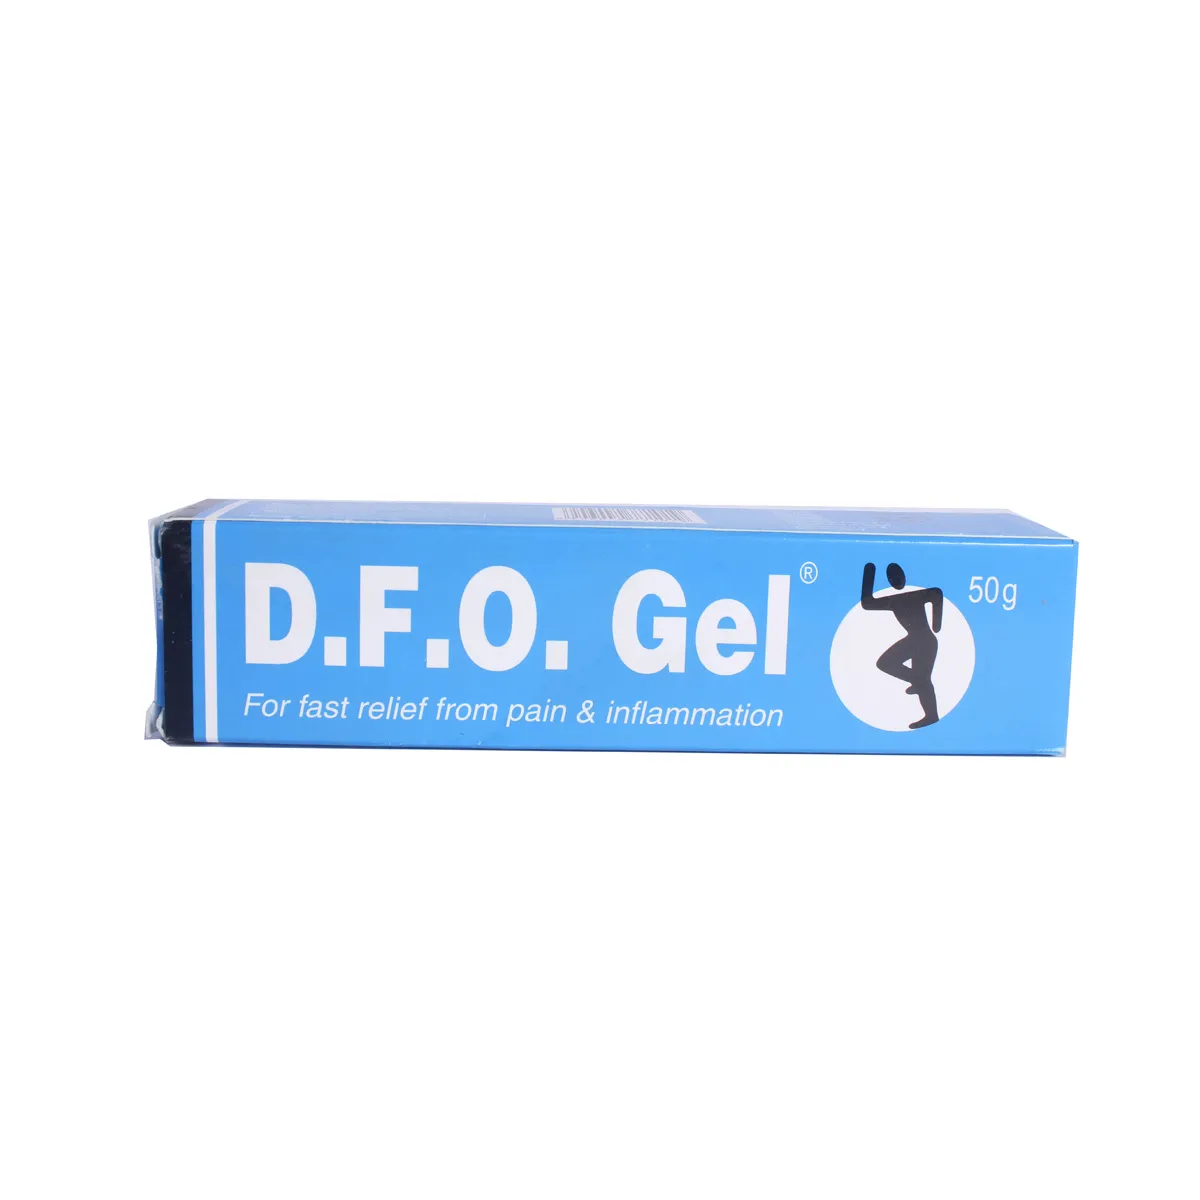 DFO Gel for Fast Relief from Pain & Inflammation